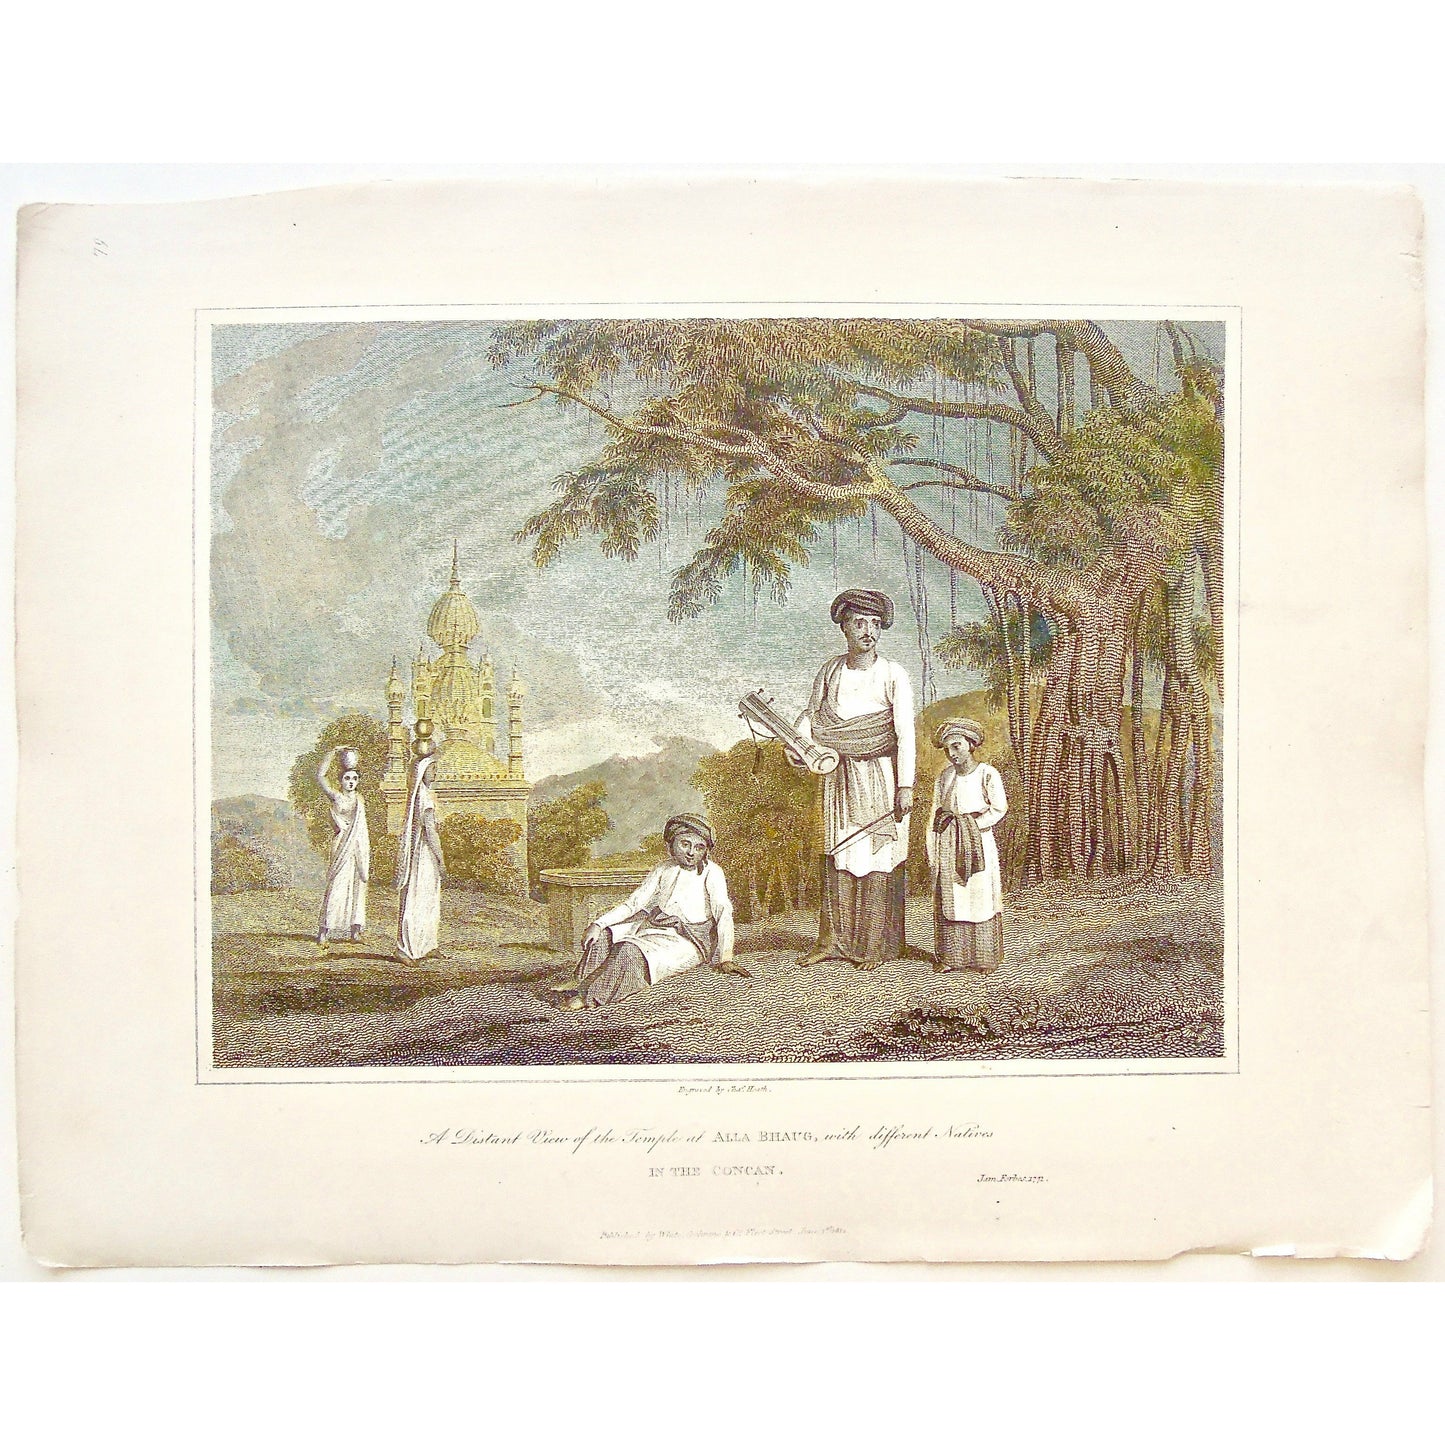 Distant view, View, Temple, Alla Bhaug, Native, Natives, Concan, India, Indian, Instrument, building, attire, clothing, allah Bhaag, Konkan, Karnataka, Goa, Maharashtra, children, sari, Water Carrying, Carrying water on head, Carrying water, pots, Scenery, James Forbes, Forbes, Oriental Memoirs, Oriental, Memoirs, Seventeen Years Residence in India, White, Cochrane & Co., Horace’s Head, Fleet Street, London, 1813, 1812, 1772, Heath, Bensley, Bolt Court, Antique Print, Antique, Prints, Vintage Prints, Vintag